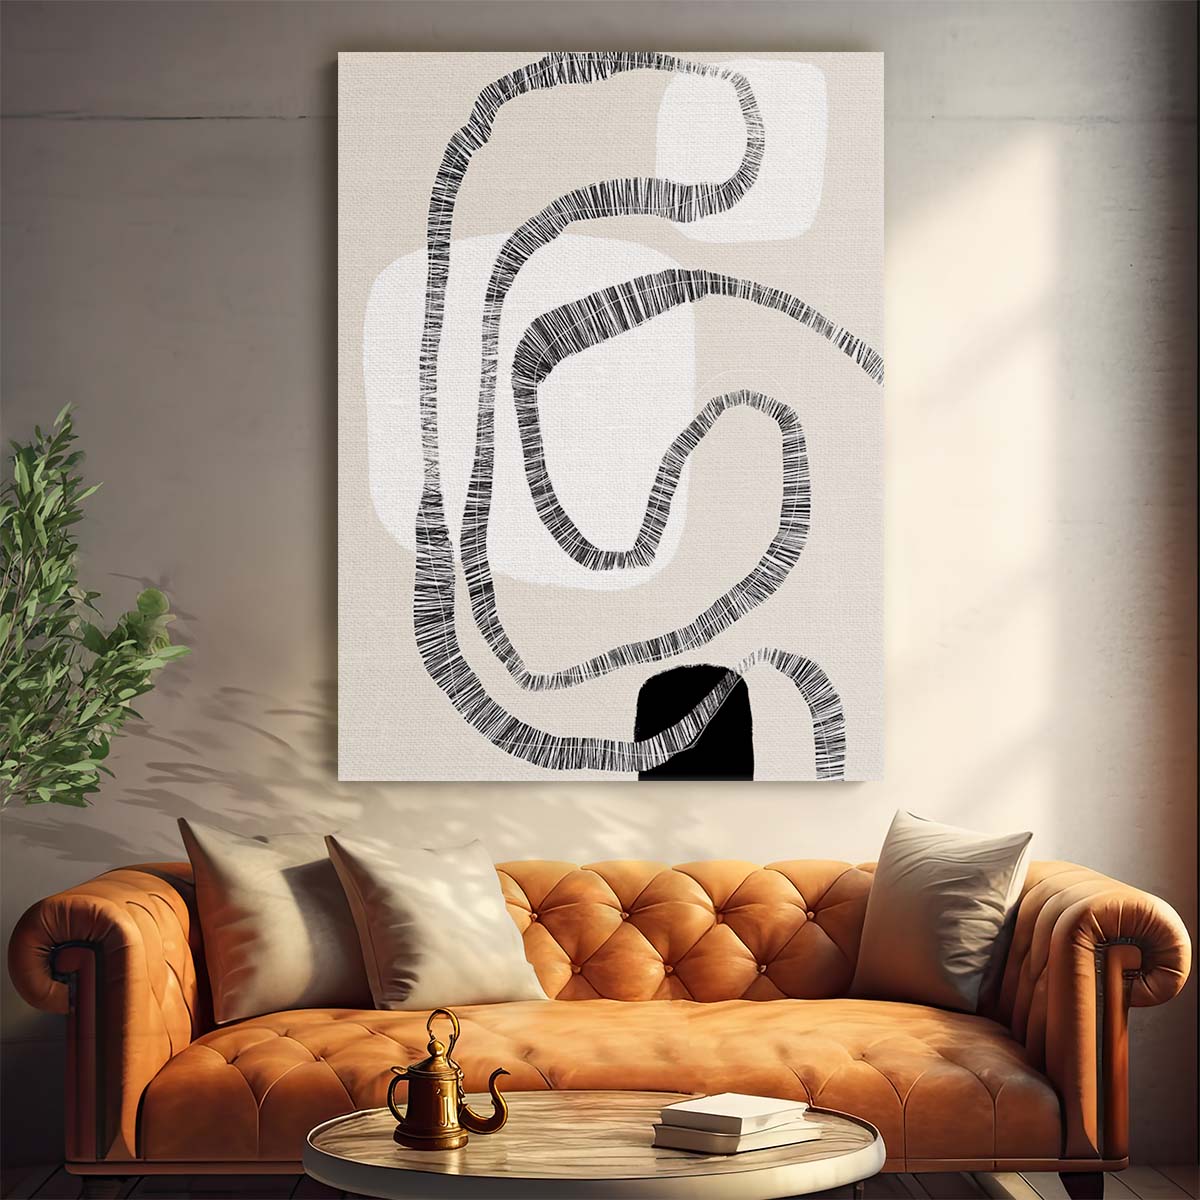 Boho Beige Abstract Illustration Bohemian Liaison Shapes Wall Art by Luxuriance Designs, made in USA